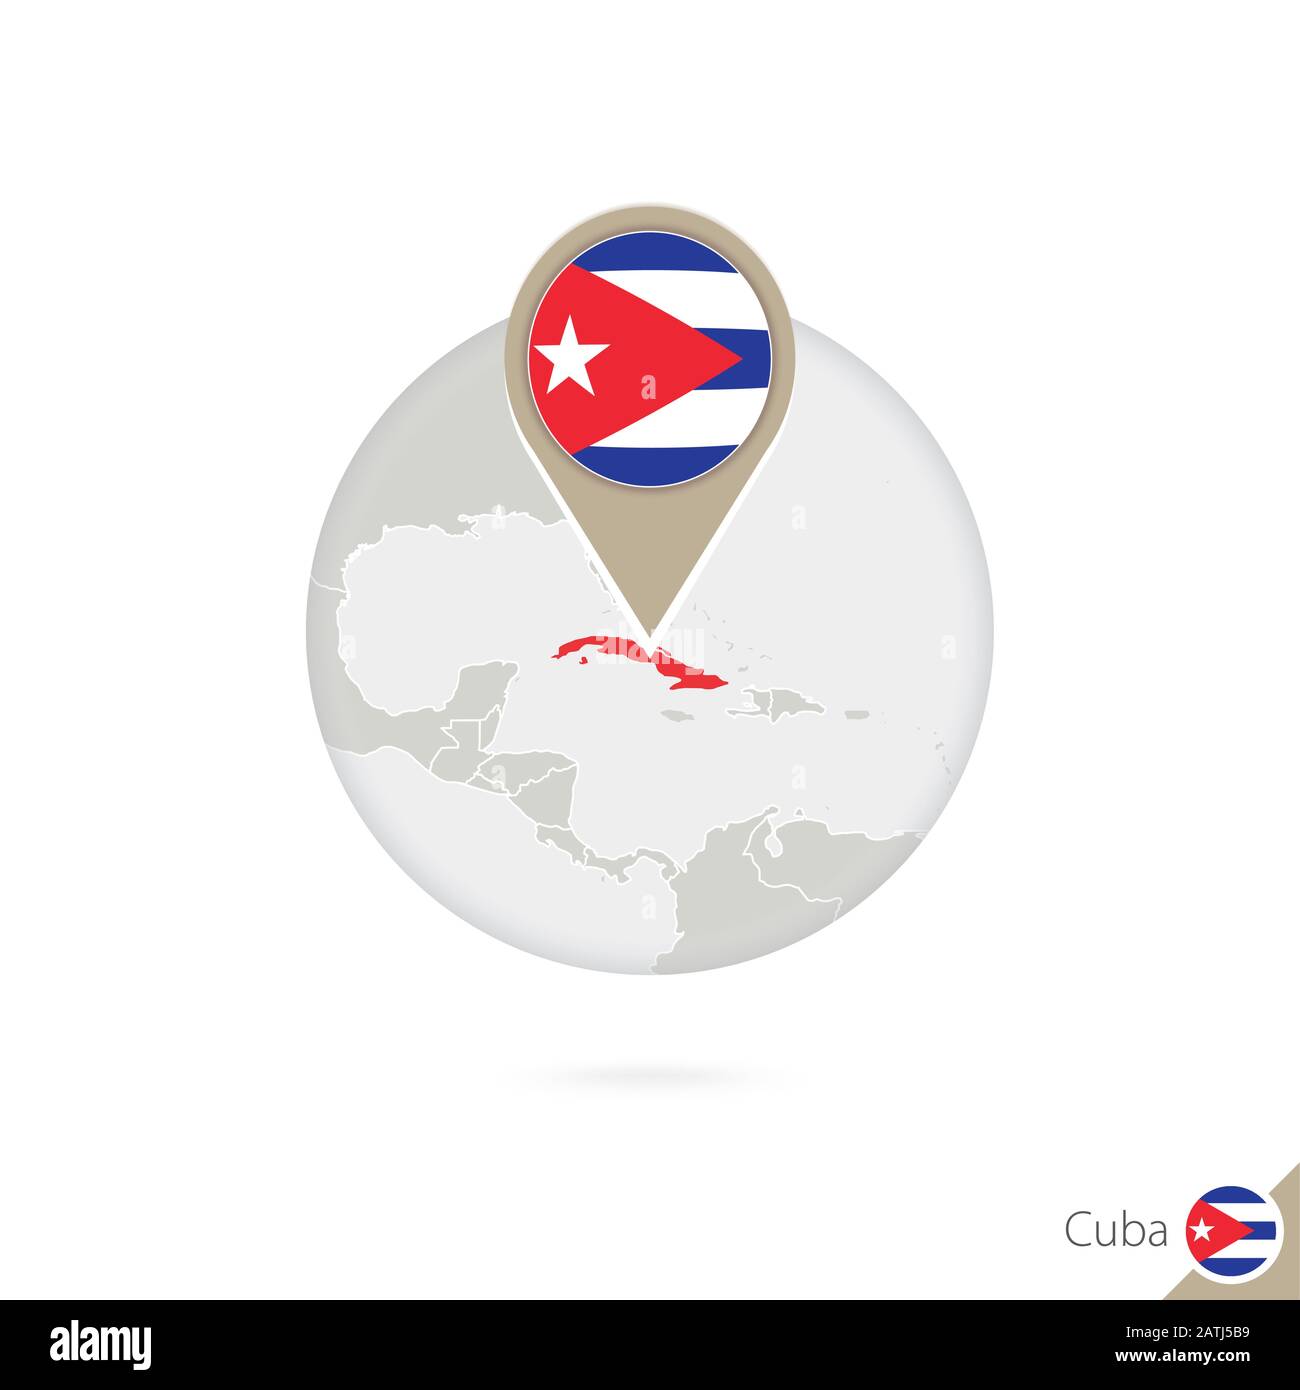 Cuba map and flag in circle. Map of Cuba, Cuba flag pin. Map of Cuba in the style of the globe. Vector Illustration. Stock Vector